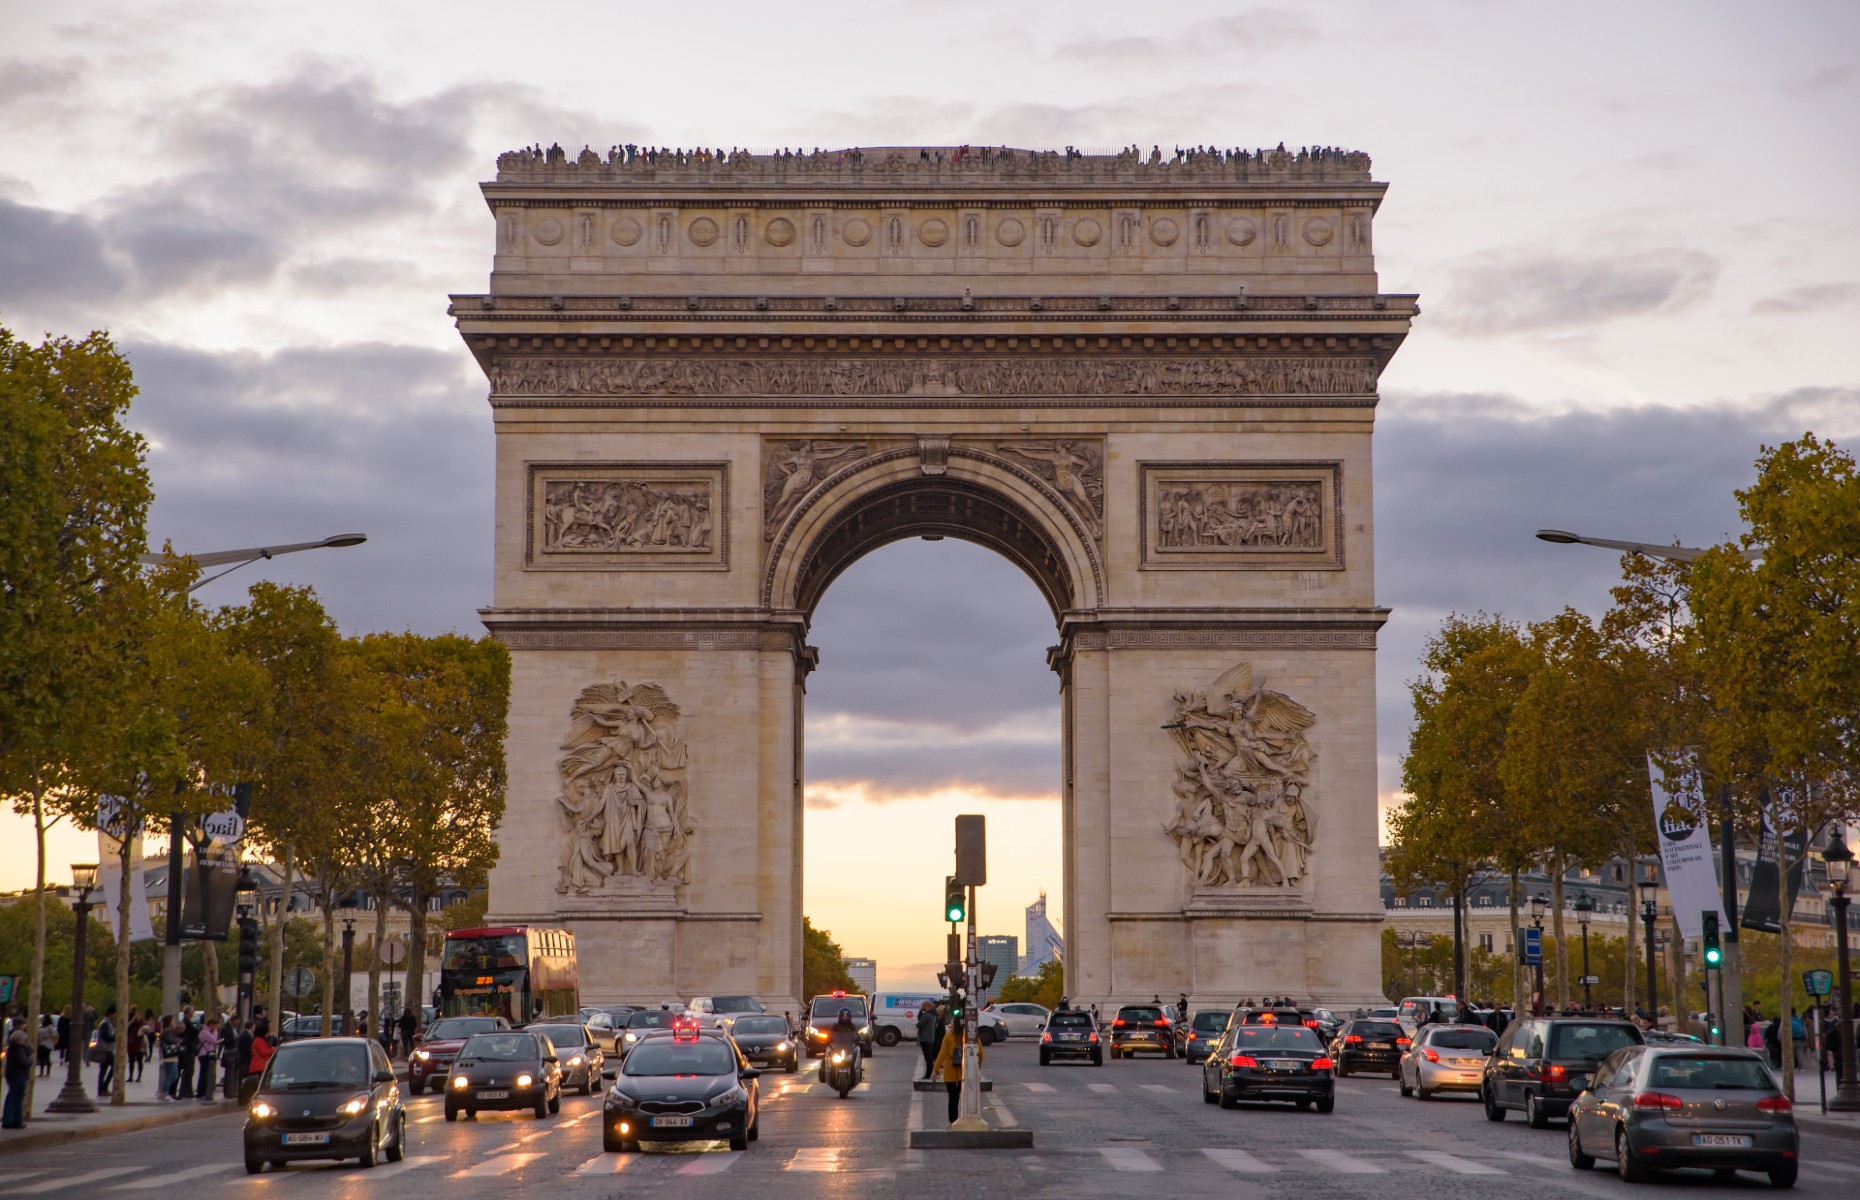 Cars in the centre of Paris (Image: Mo Wu/Shutterstock)